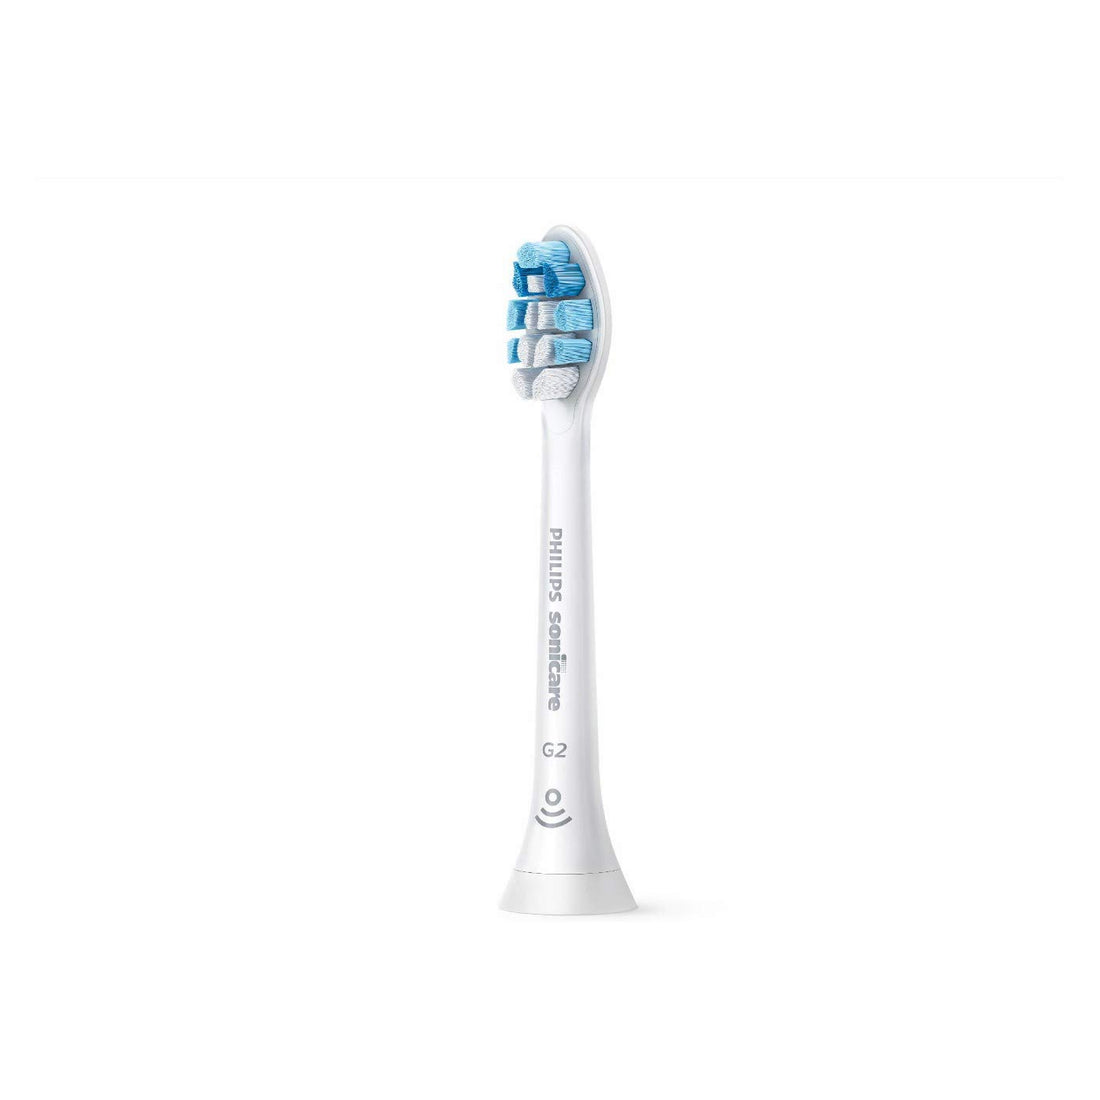 Philips Sonicare ProtectiveClean 5100 Plaque Control, Rechargeable electric toothbrush with pressure sensor, White Mint HX6857/11